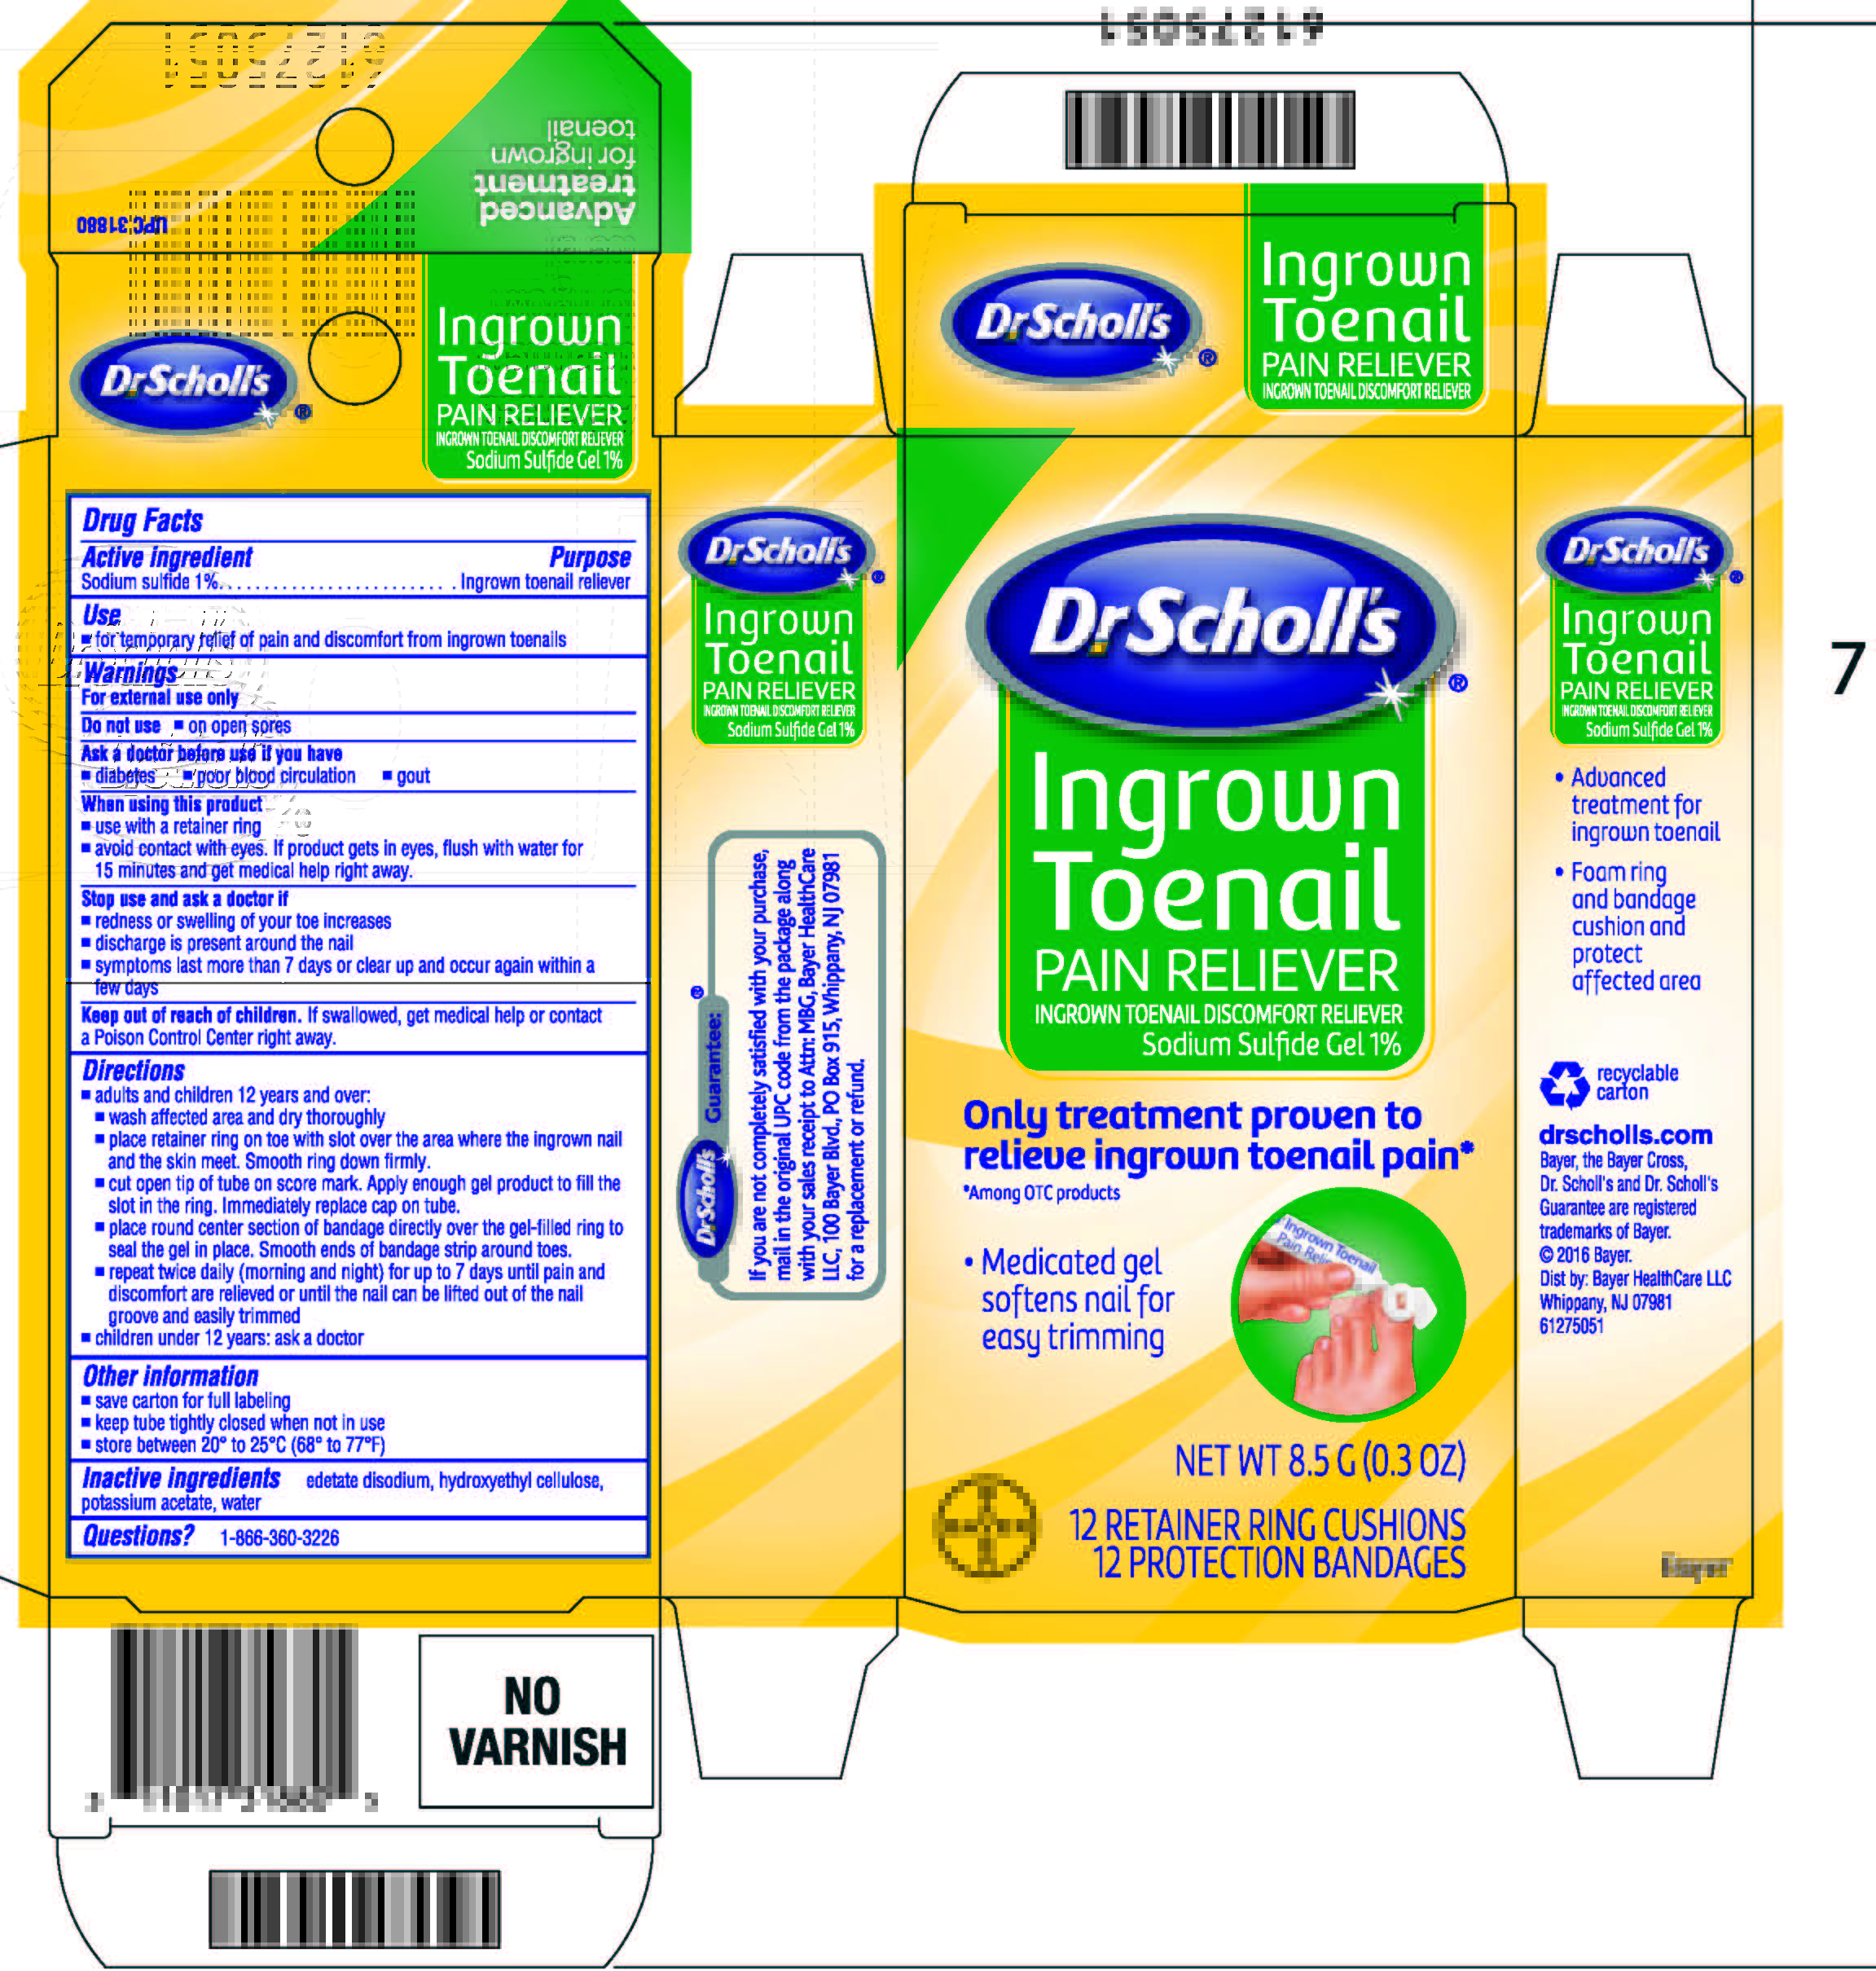 61275051 US Dr Scholls Ingrown Toe Nail Pain Reliever CTN PA Clean%20Reduced